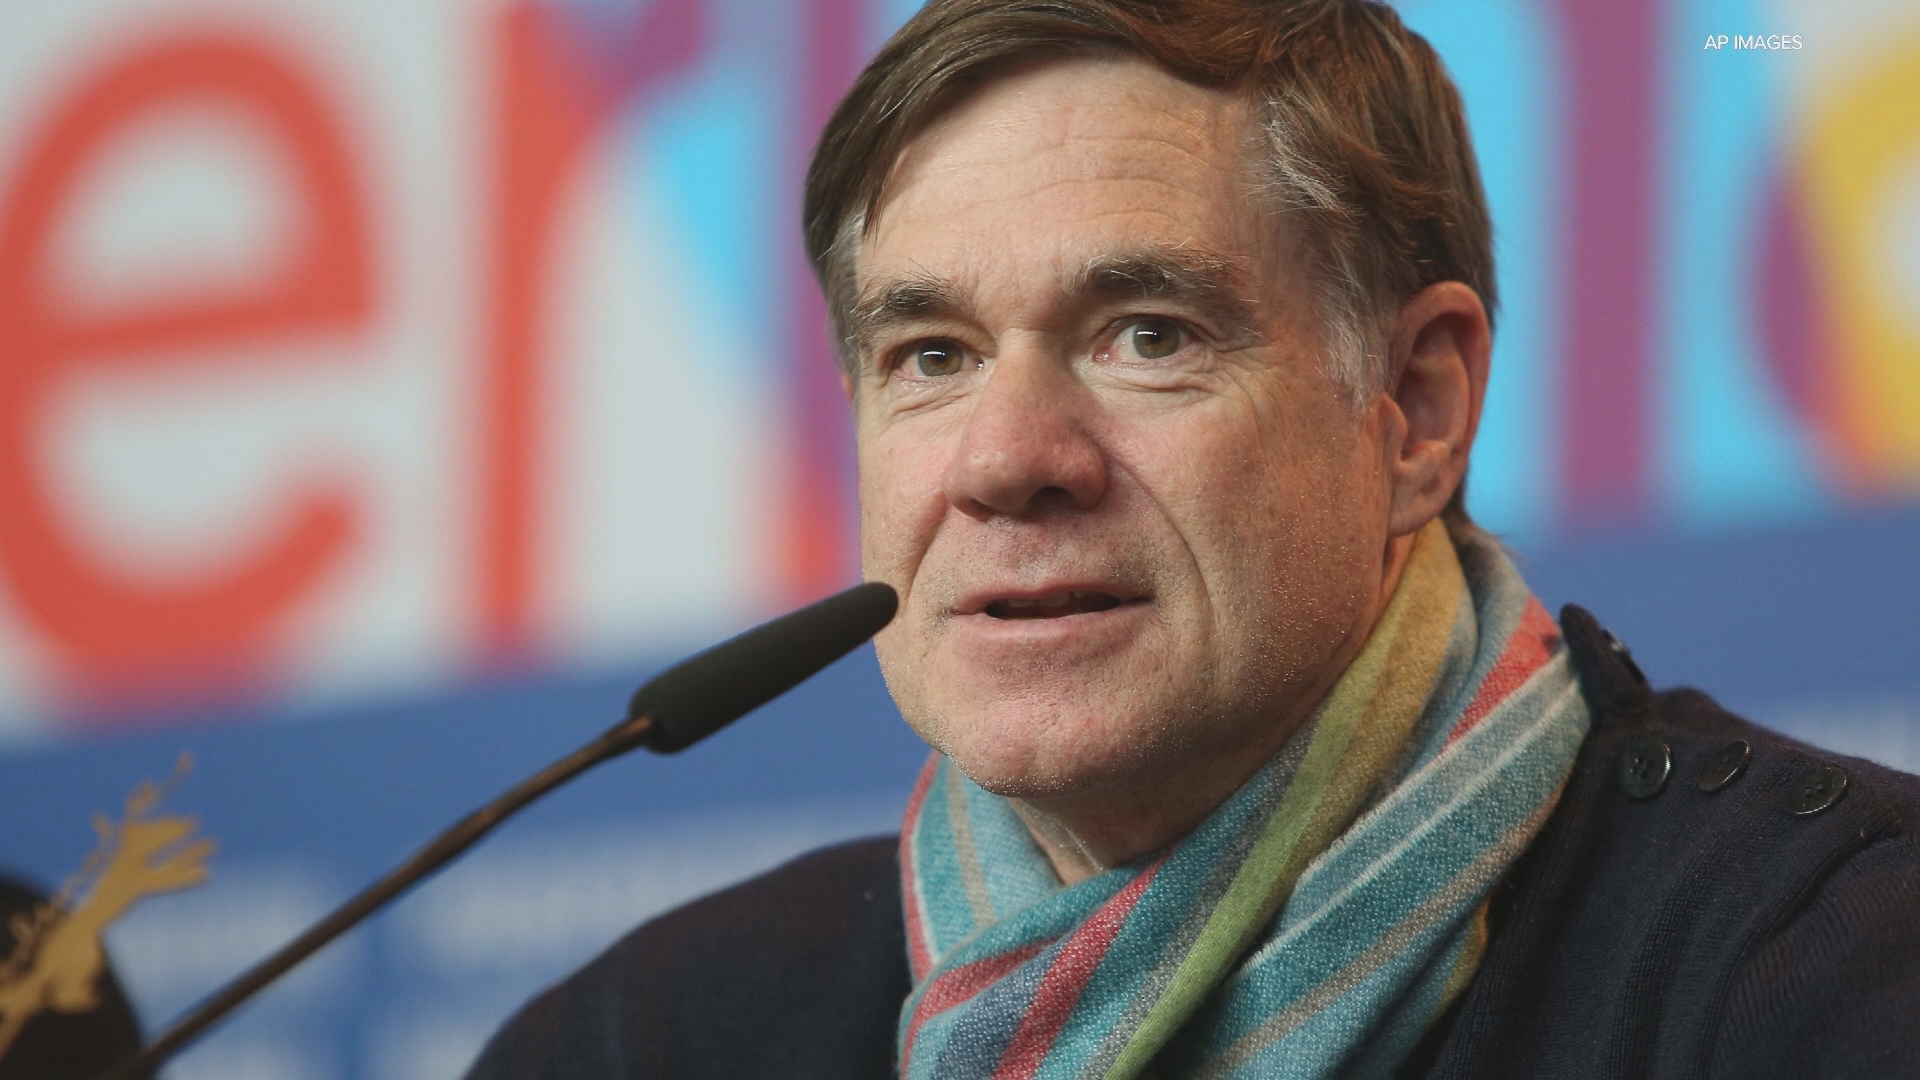 Two time Academy Award nominated filmmaker Gus Van Sant is often credited with helping shape the landscape of LGBTQ+ filmmaking.